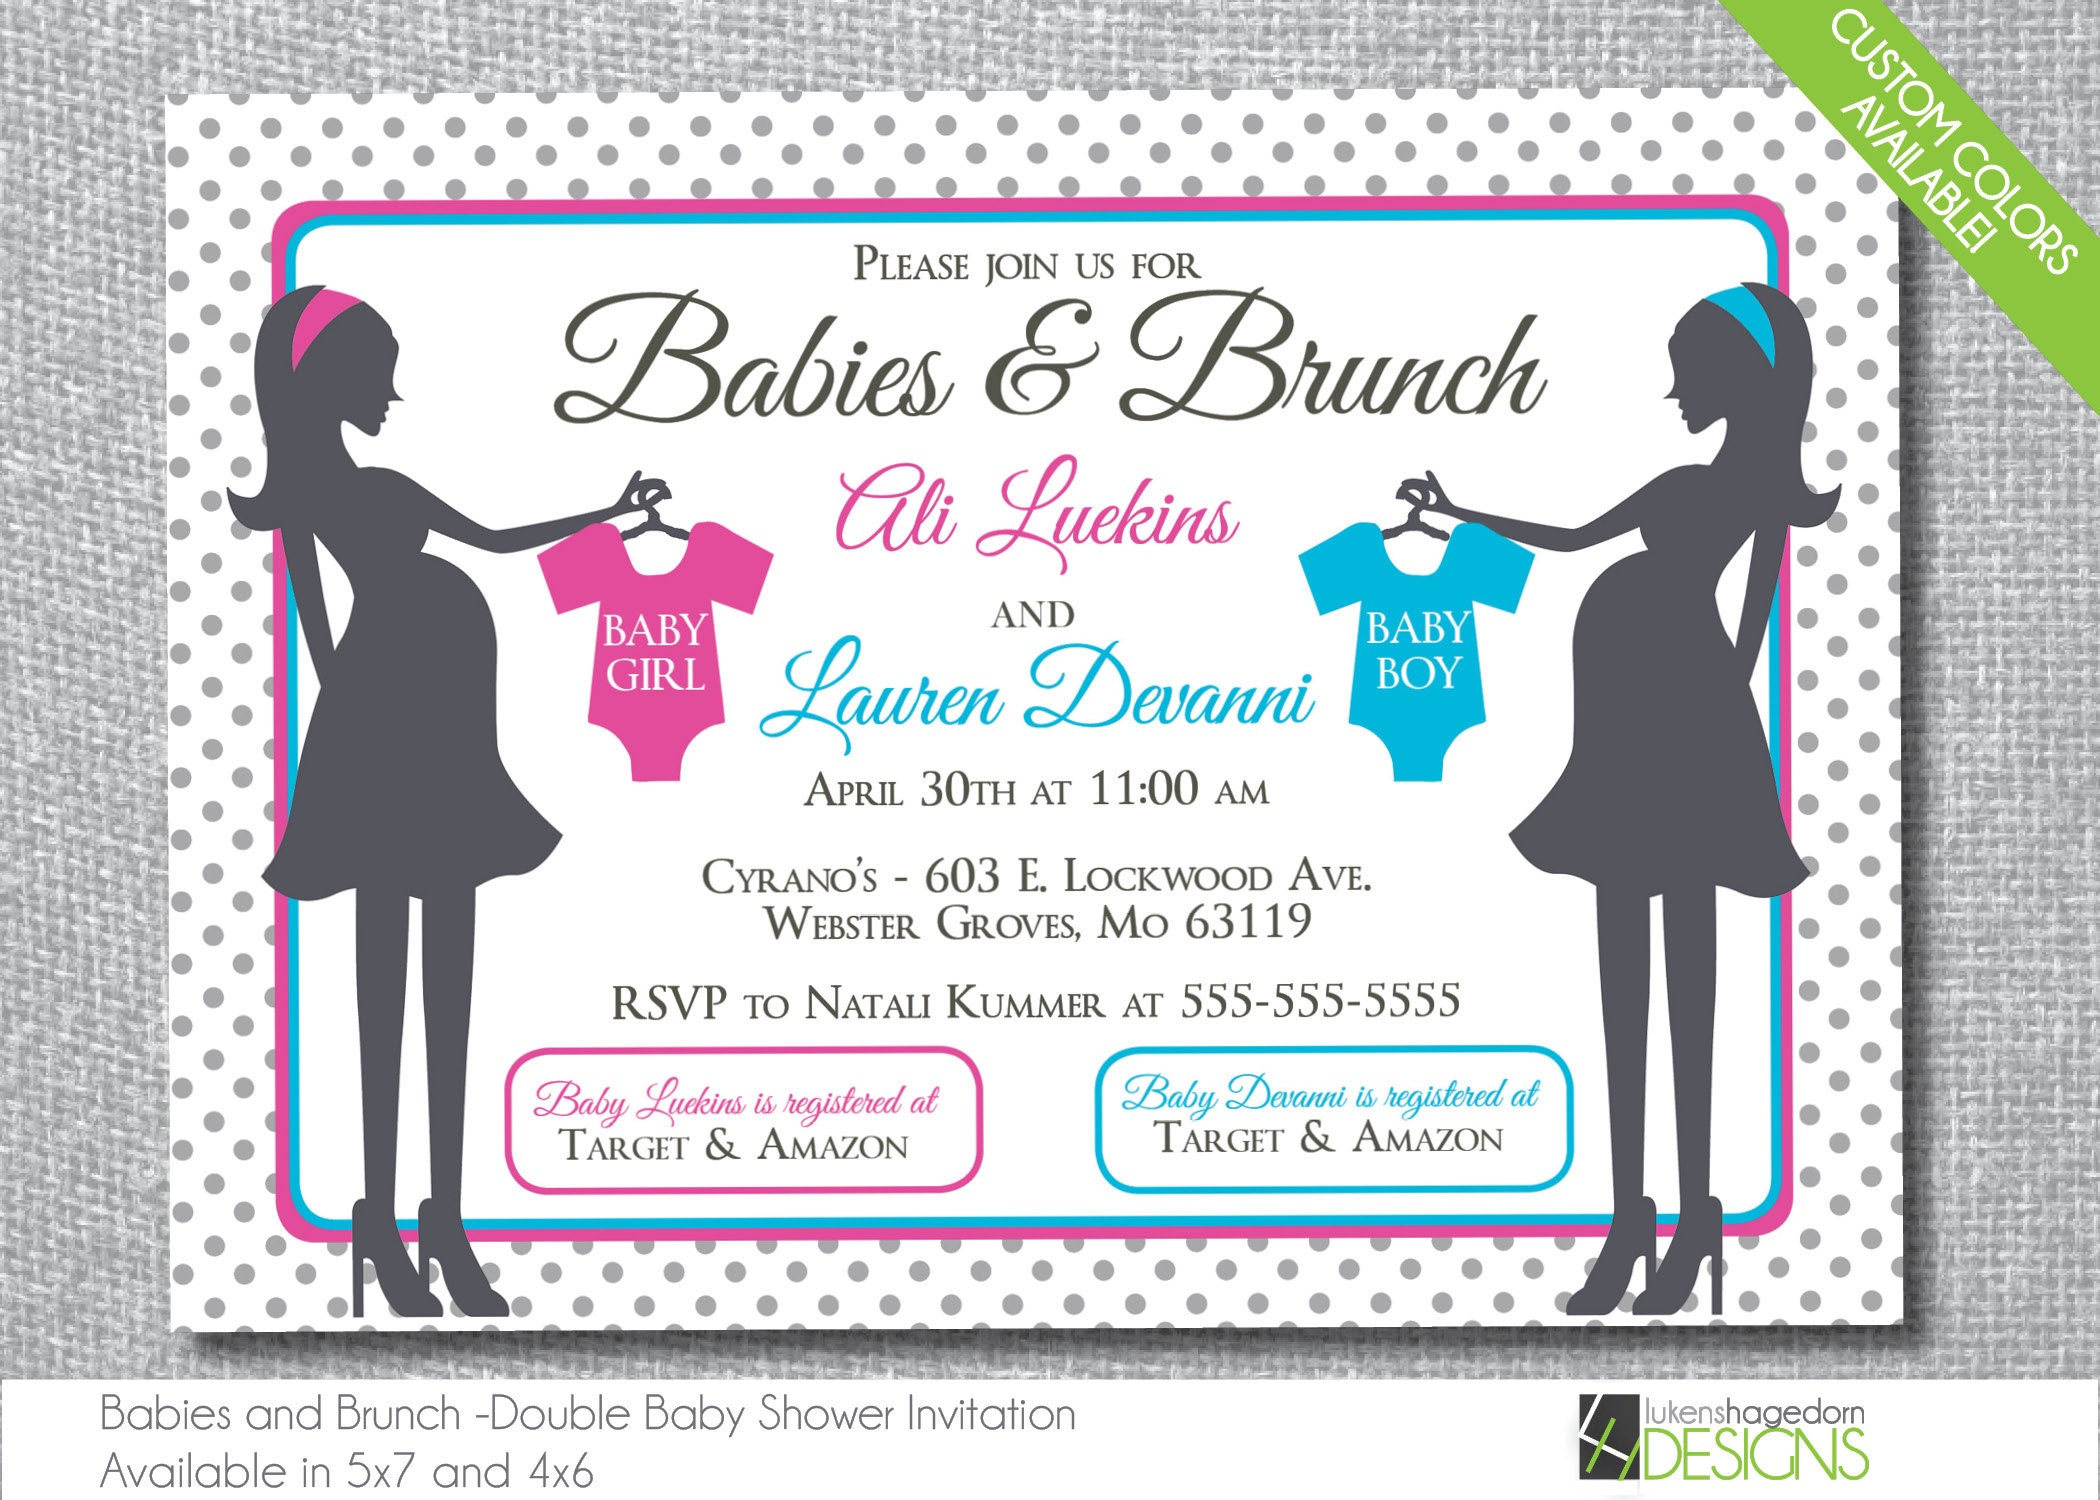 babies-and-brunch-double-baby-shower-invitation-custom-etsy